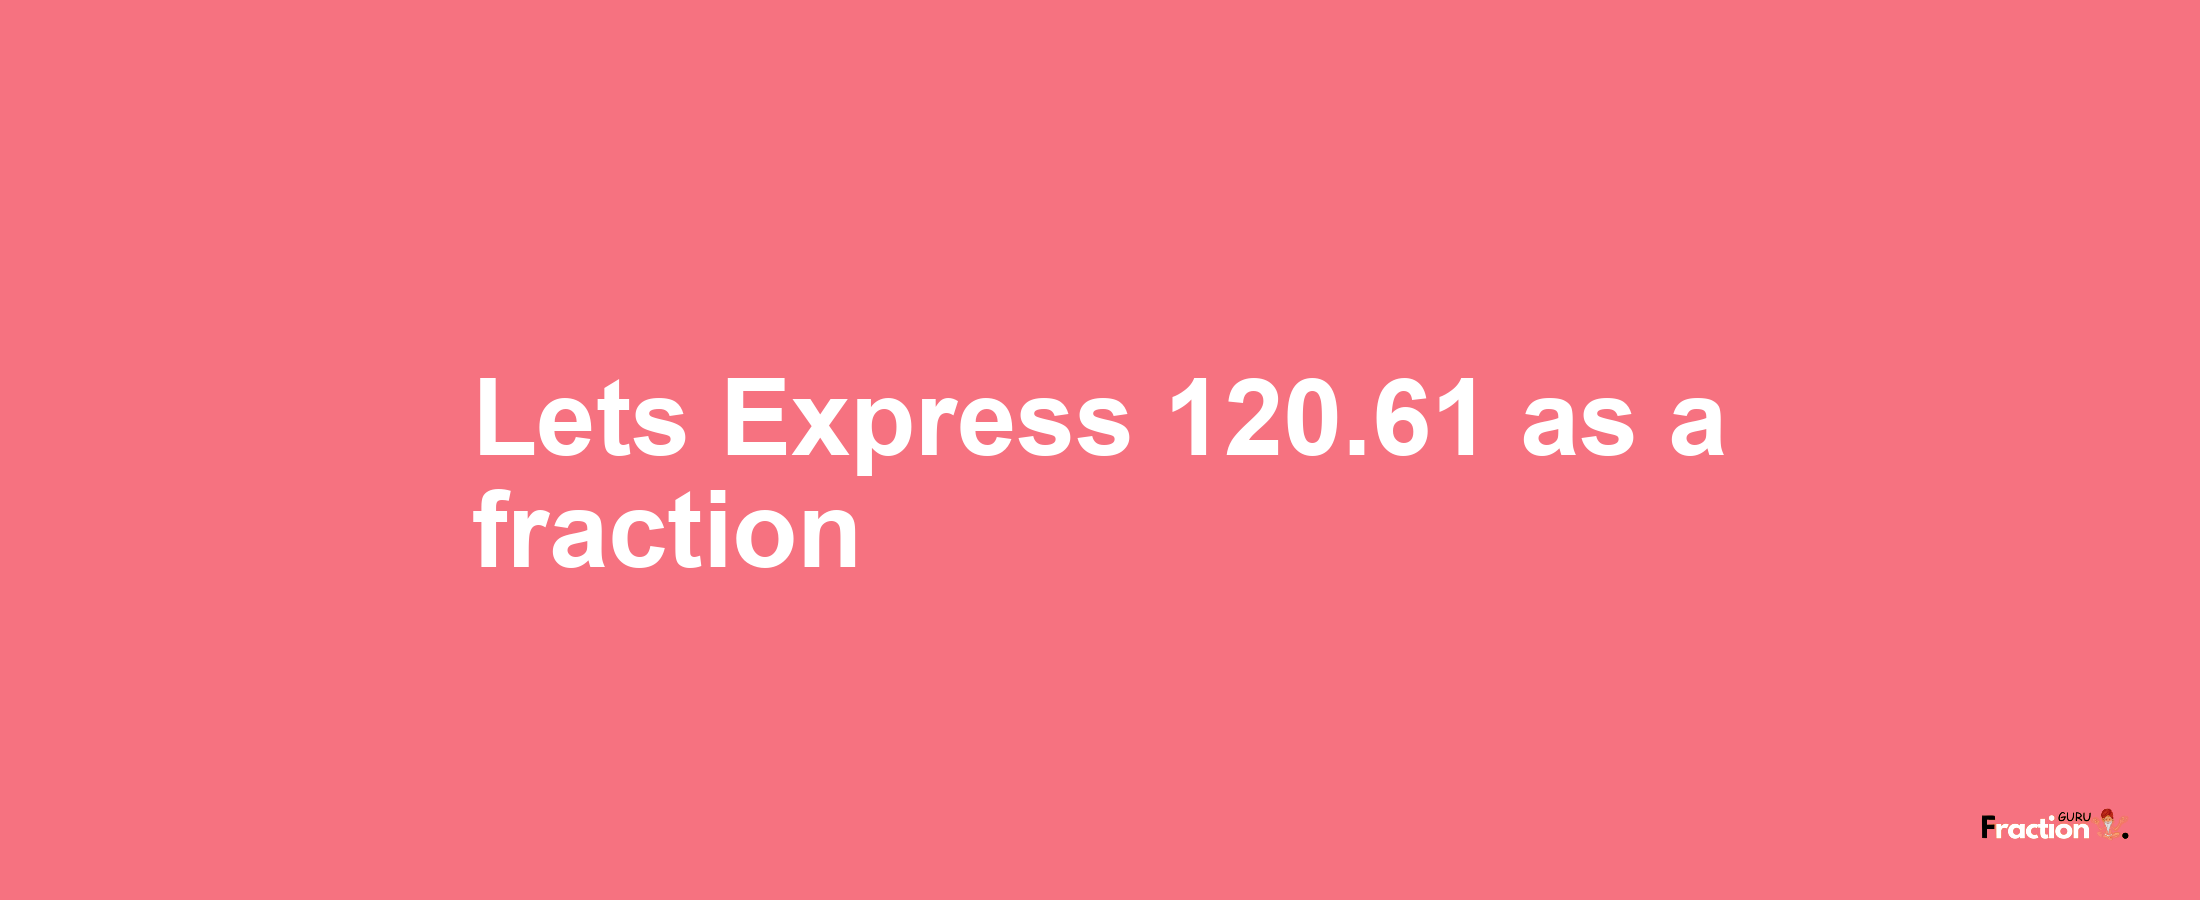 Lets Express 120.61 as afraction